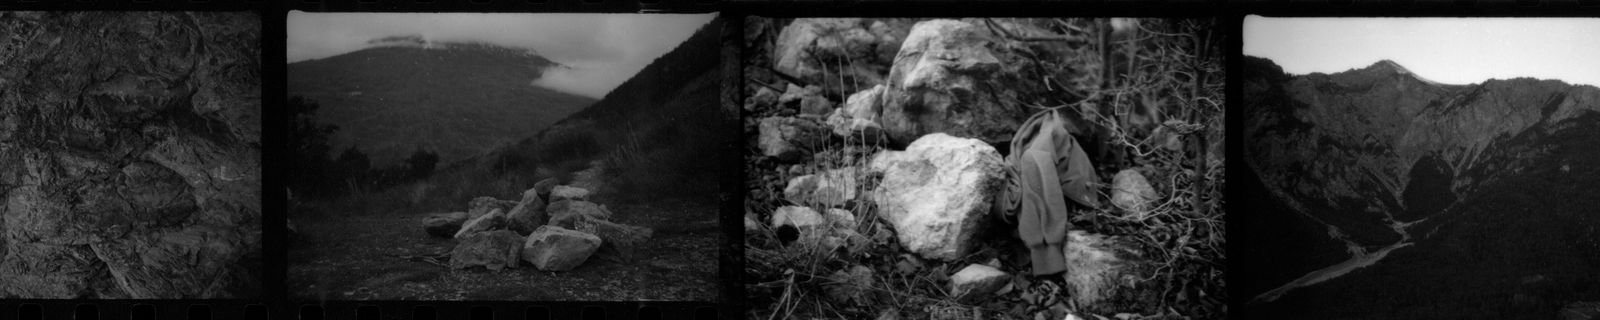 © Florence Cuschieri - Images extract from the contact sheet of the 26 km walk from Clavières (IT) to Briançon (FR).